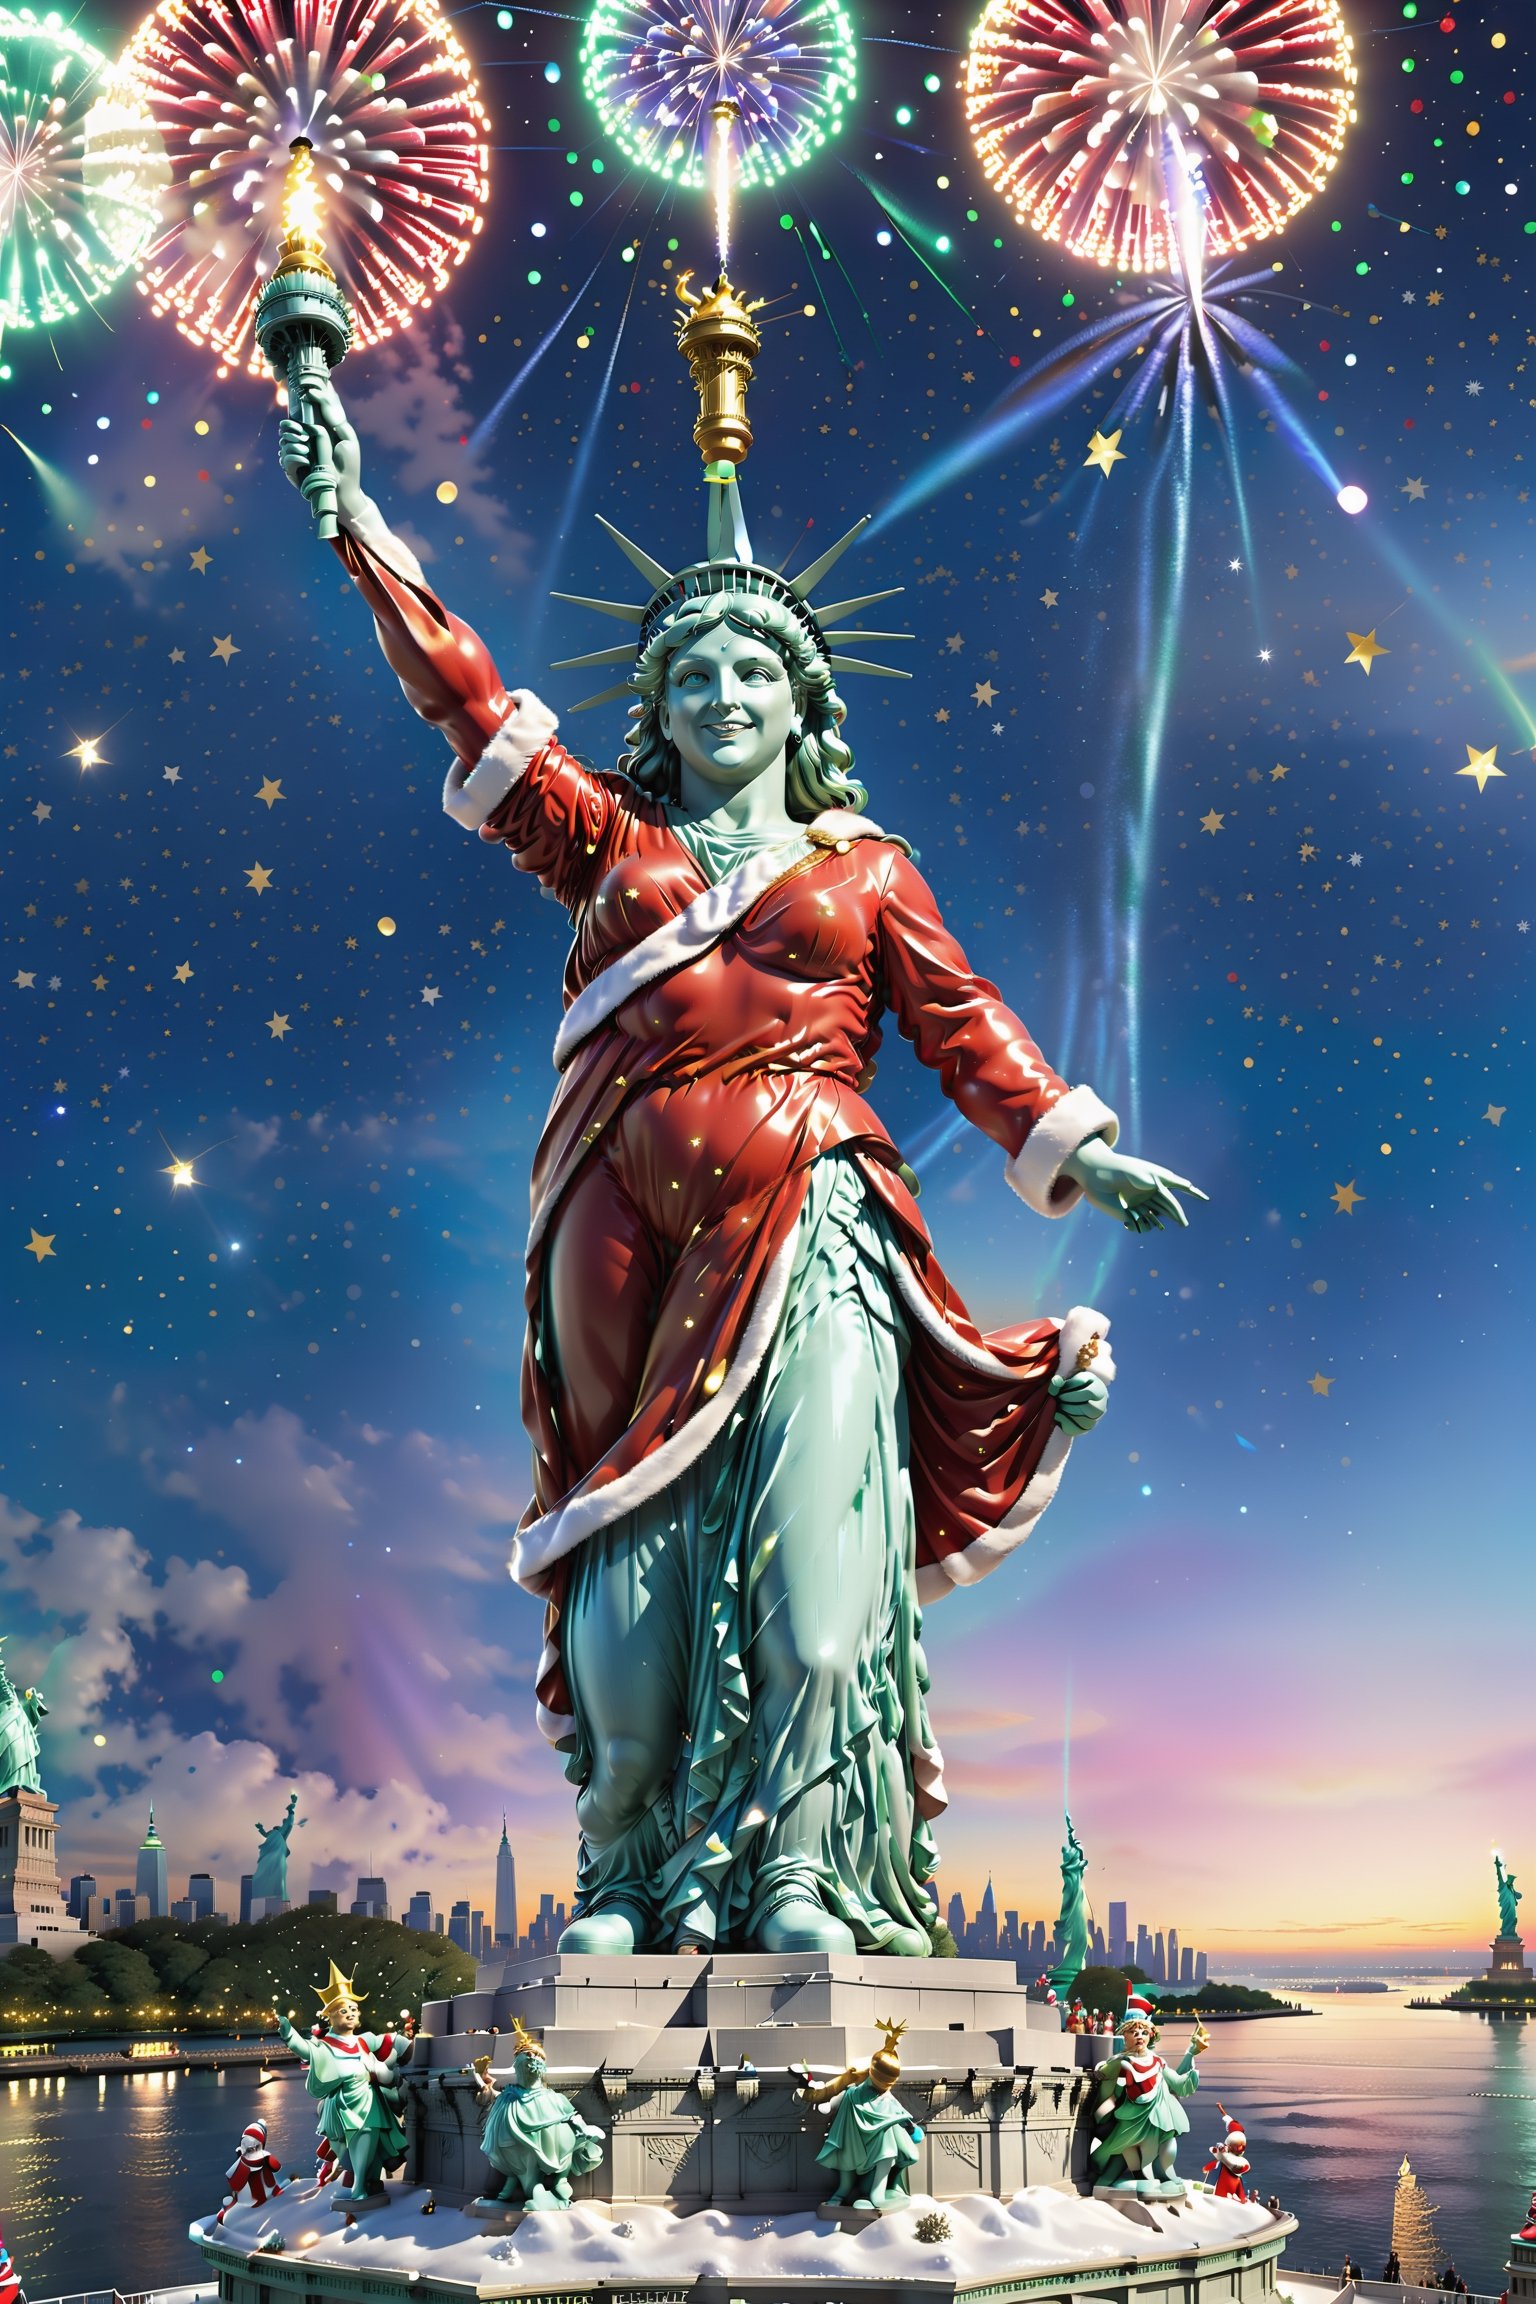 In this cheerful scene, Santa Claus launches into a merry dance on top of the Statue of Liberty. The night sky is sprinkled with sparkling stars, while the massive silhouette of Lady Liberty is reflected in the distant city lights.

Santa Claus, dressed in a sparkling red and white Christmas costume and a gold-trimmed Santa hat, displays a jubilant gesture as he leaps and twirls on top of Lady Liberty. In his hands he may hold a string of colorful Christmas lights, lighting up the scene like sparkling fireworks with each dance.

The Statue of Liberty holds a torch aloft behind her, providing a soft background light for this unique dance. Santa's energetic dance steps, perhaps accompanied by upbeat music, transforms the moment into a scene of laughter and celebration.

The city lights in the distance form a beautiful backdrop that complements Santa's joyful dance. The whole picture presents a colorful and joyful atmosphere, giving people a sense of the cheerfulness and warmth of the Christmas season.